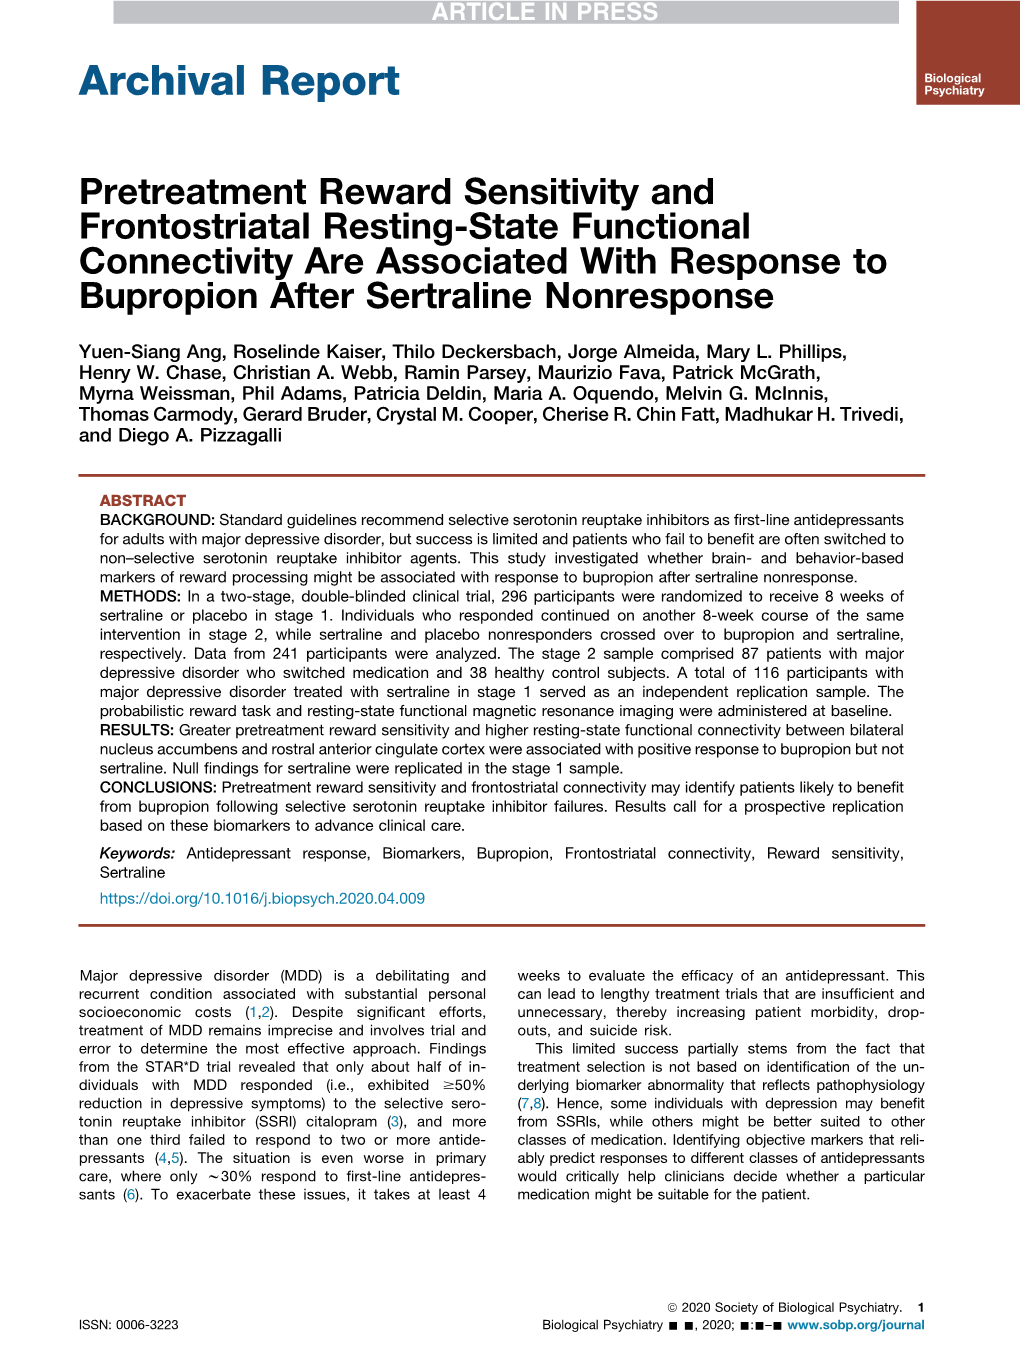 Pretreatment Reward Sensitivity and Frontostriatal Resting-State Functional Connectivity Are Associated with Response to Bupropion After Sertraline Nonresponse